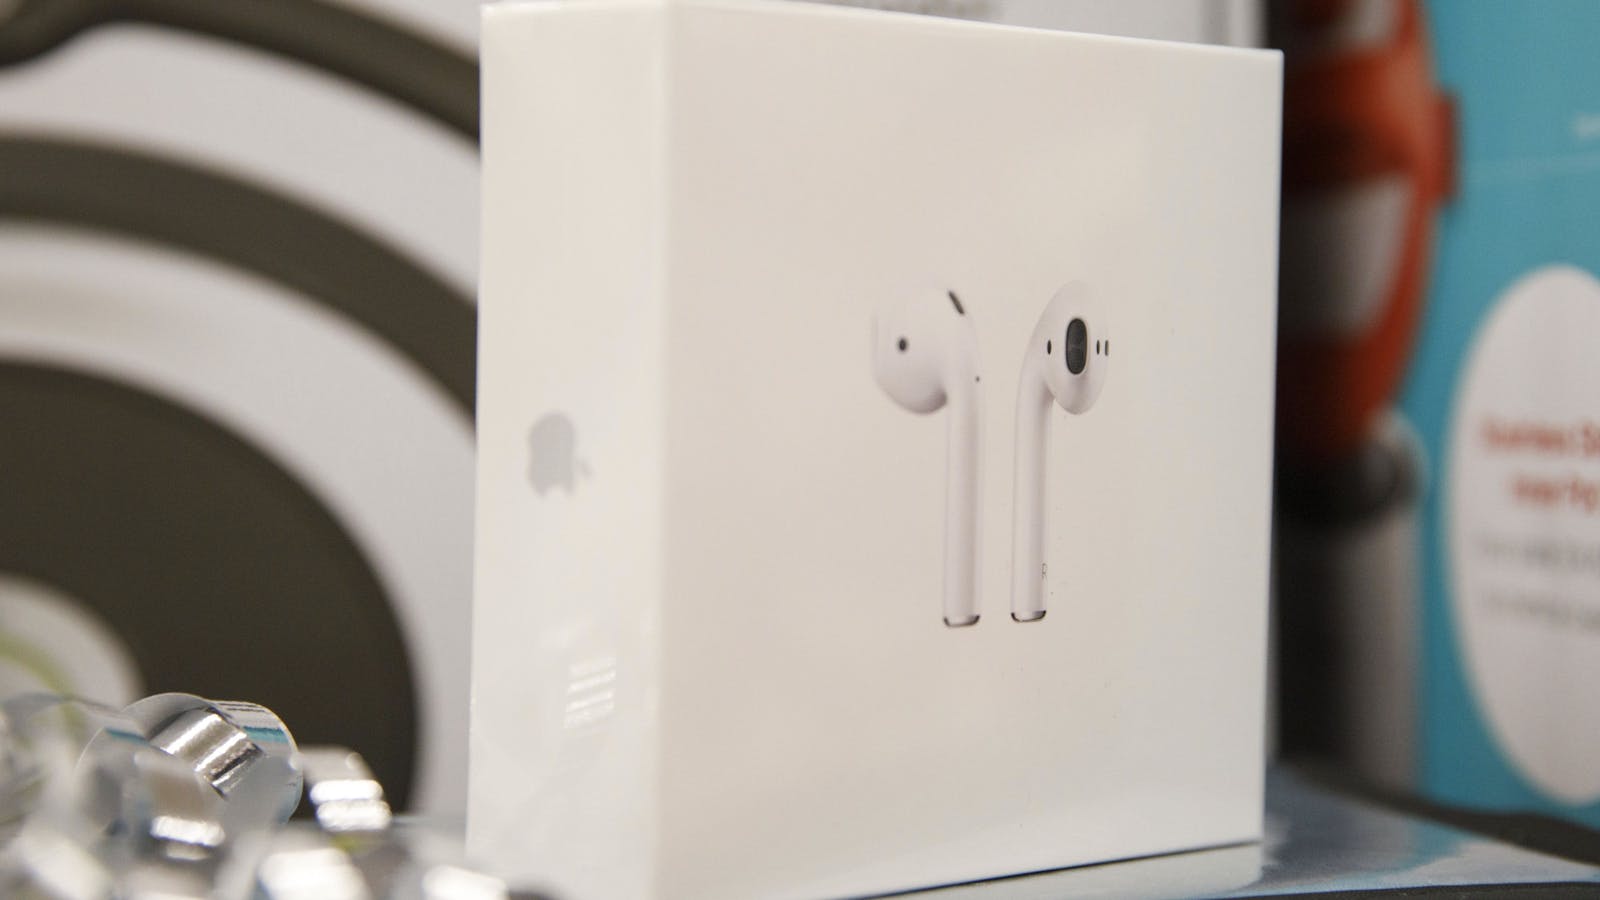 Apple AirPods at a Walmart story last month. Photo by Bloomberg